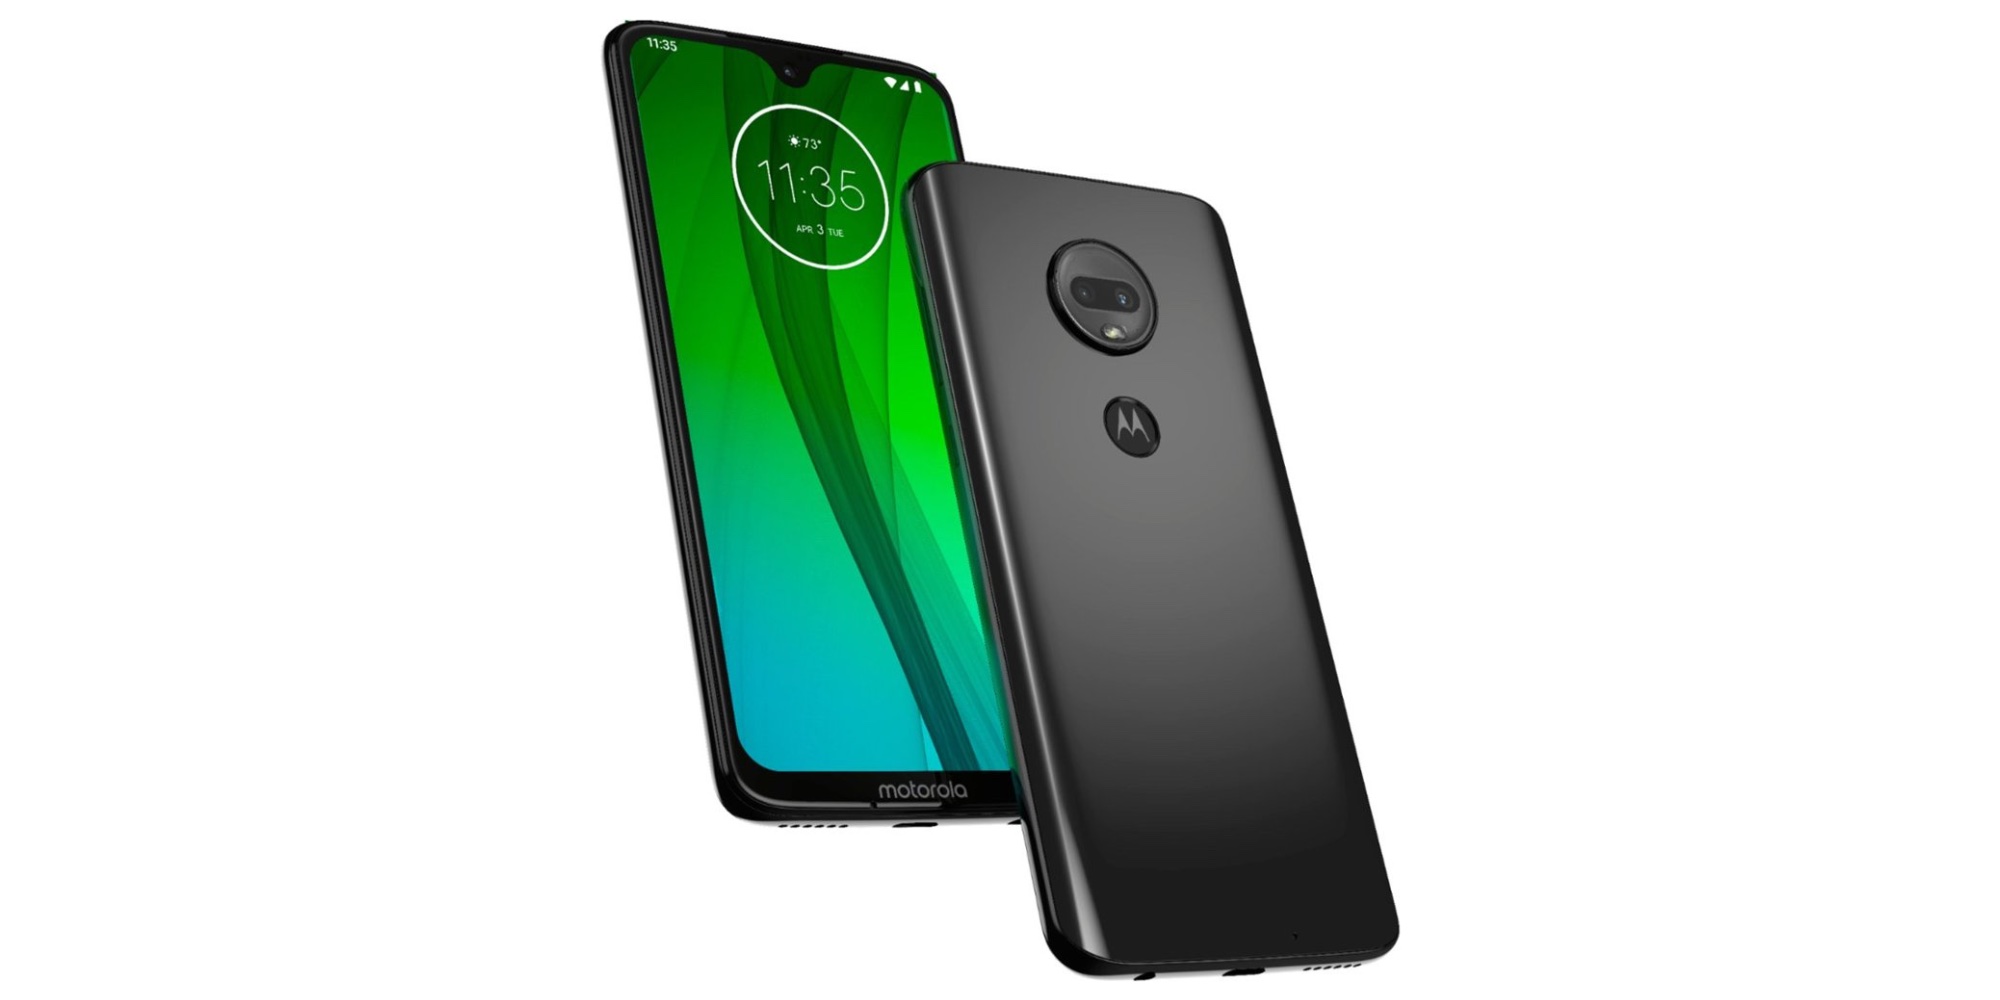 Save 33% on Motorola's Moto G7 Android Smartphone at a 2020 low of $200